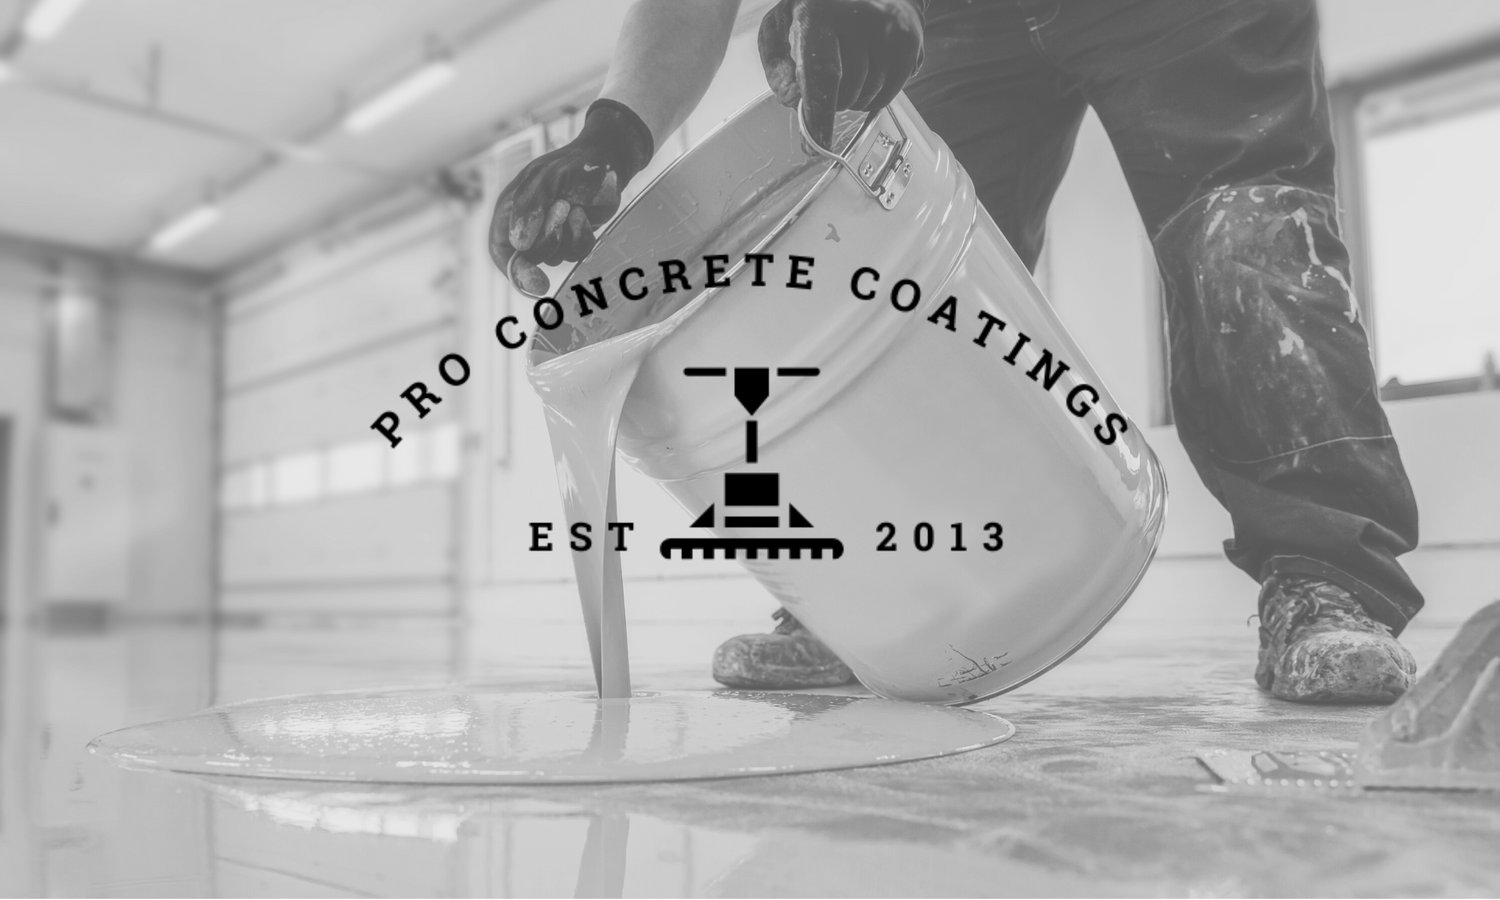 Pro Concrete Coatings is a company that provides the best epoxy and sealers for garage, commercial, industrial flooring or home DIY projects and renos. Order products online or visit in store. Installation services available. Visit website for free quote.